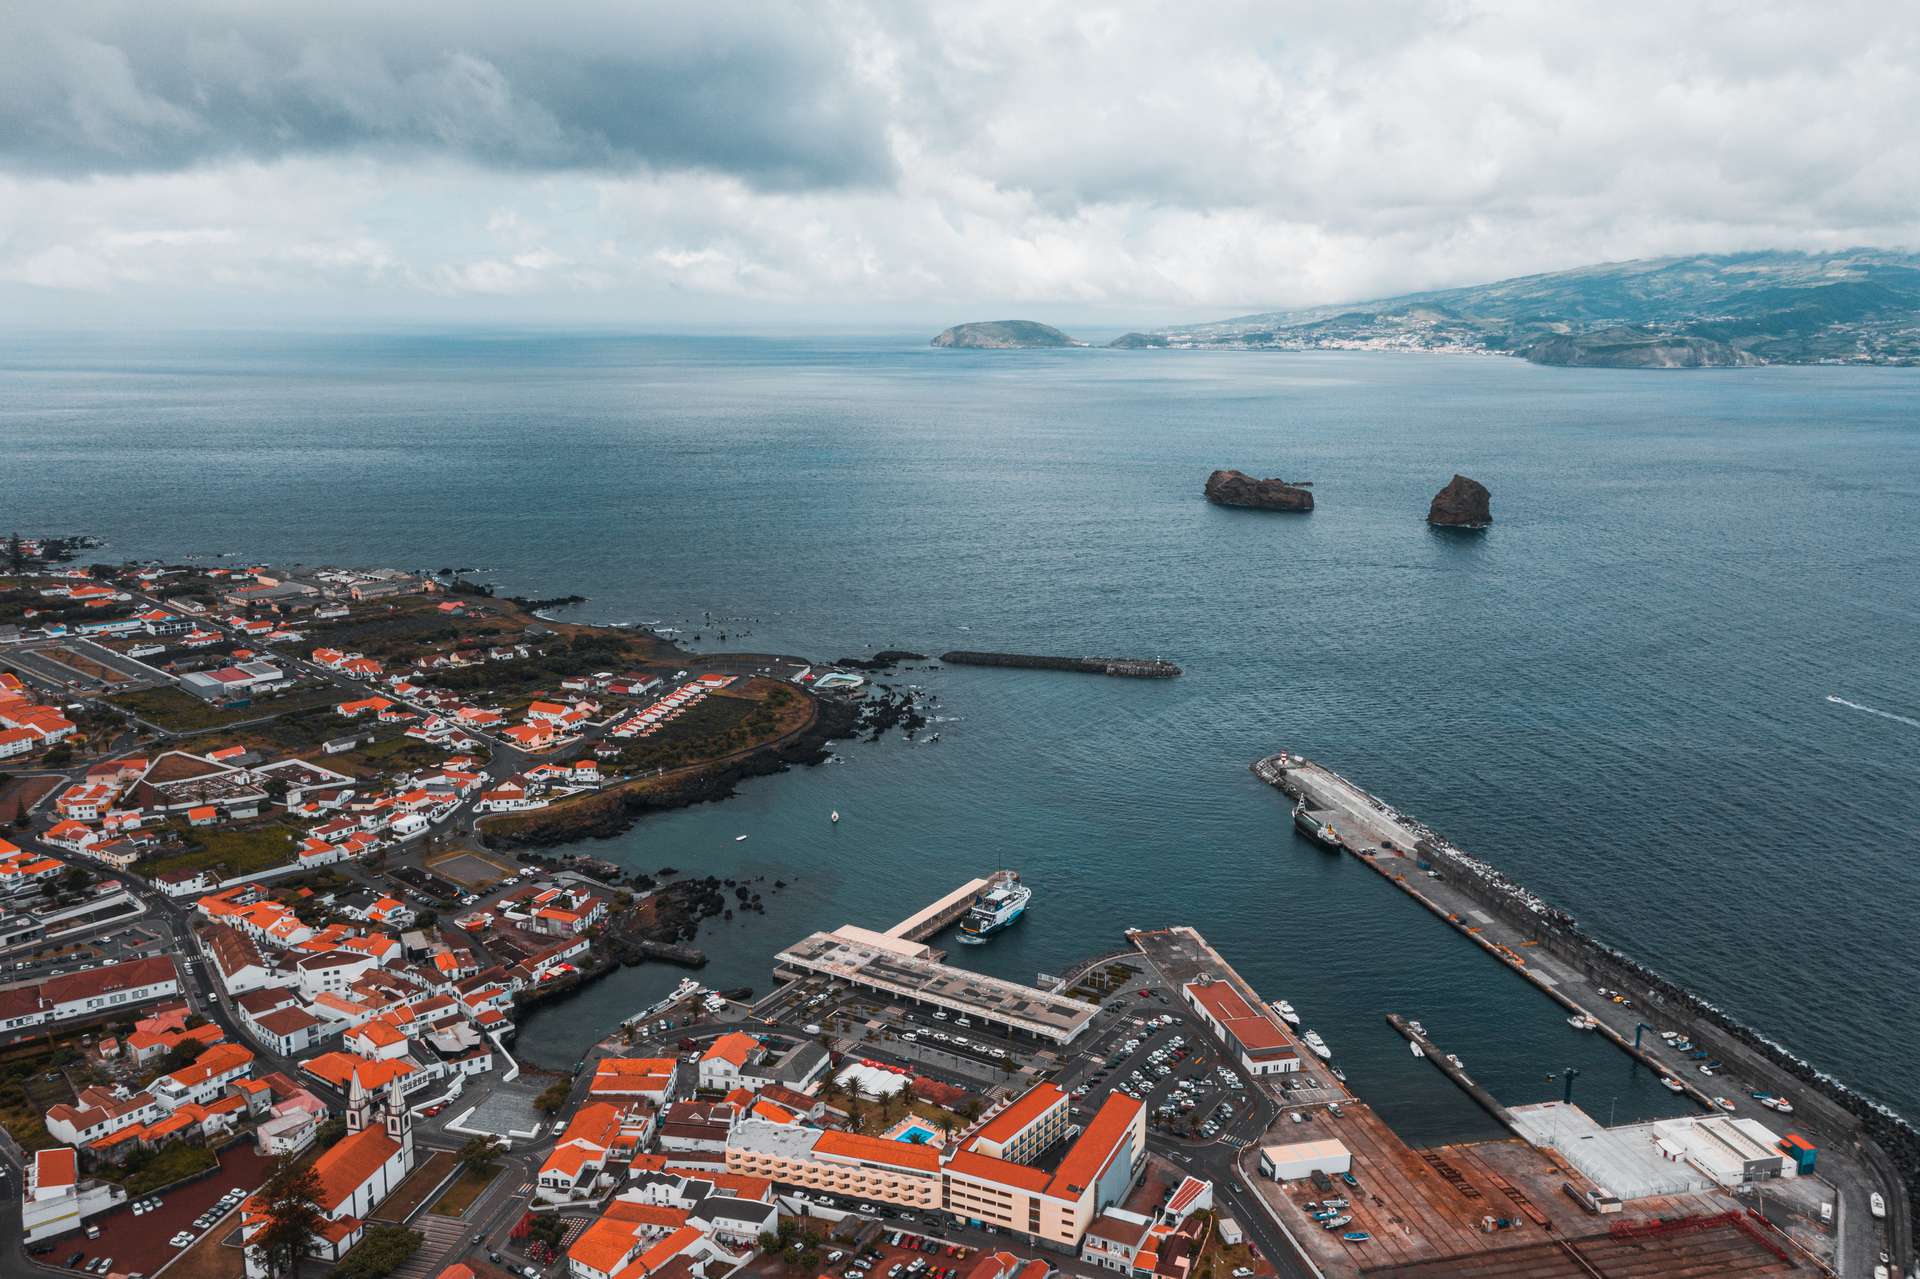 Aerial view of houses, buildings and the sea in Pico, The Azores. Pico views and trouble parking at the whaling museum